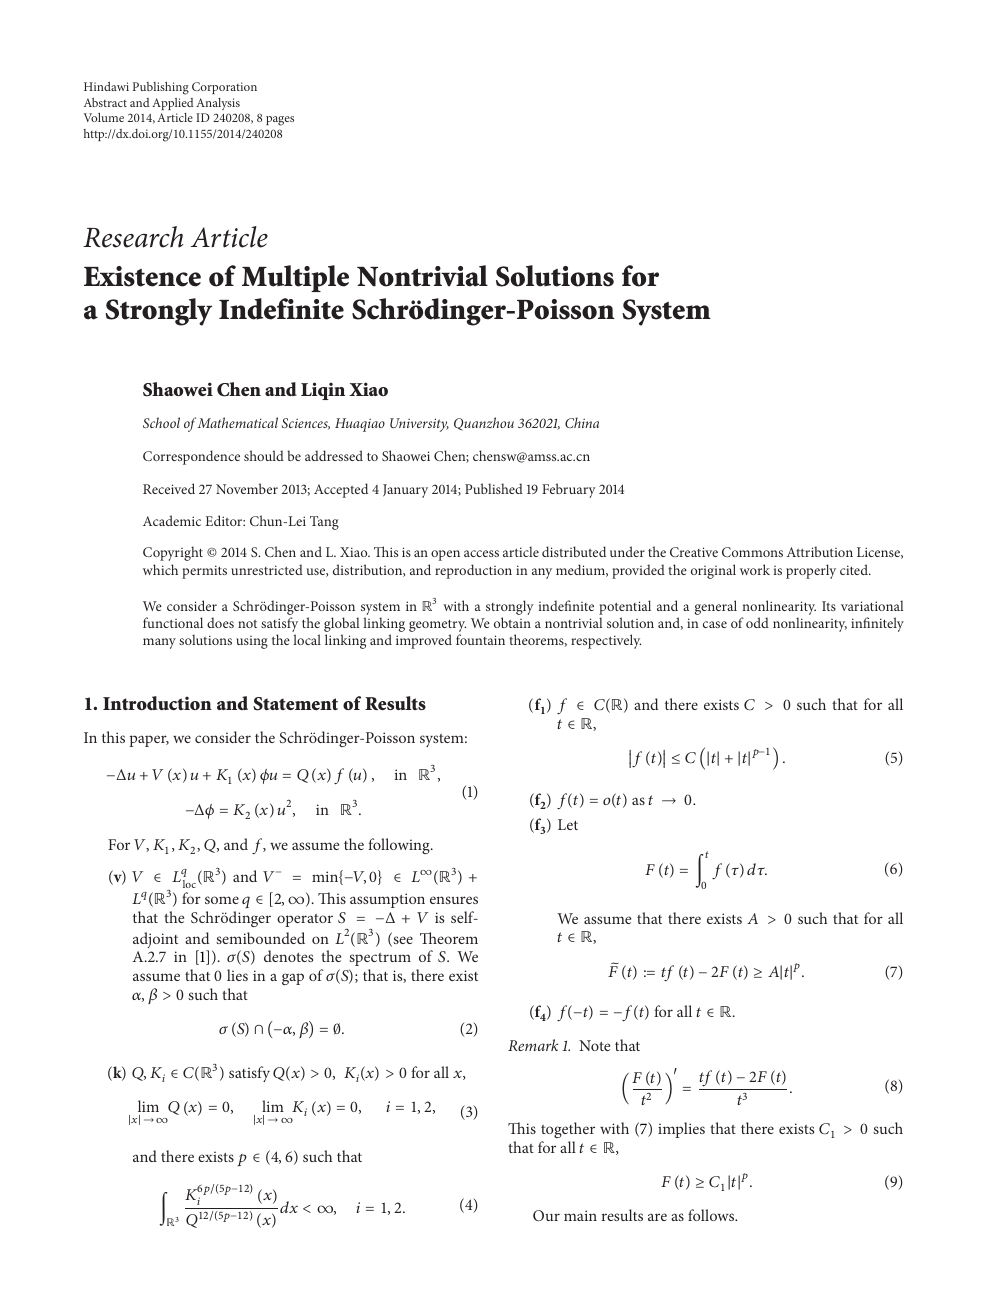 Existence Of Multiple Nontrivial Solutions For A Strongly Indefinite Schrodinger Poisson System Topic Of Research Paper In Mathematics Download Scholarly Article Pdf And Read For Free On Cyberleninka Open Science Hub